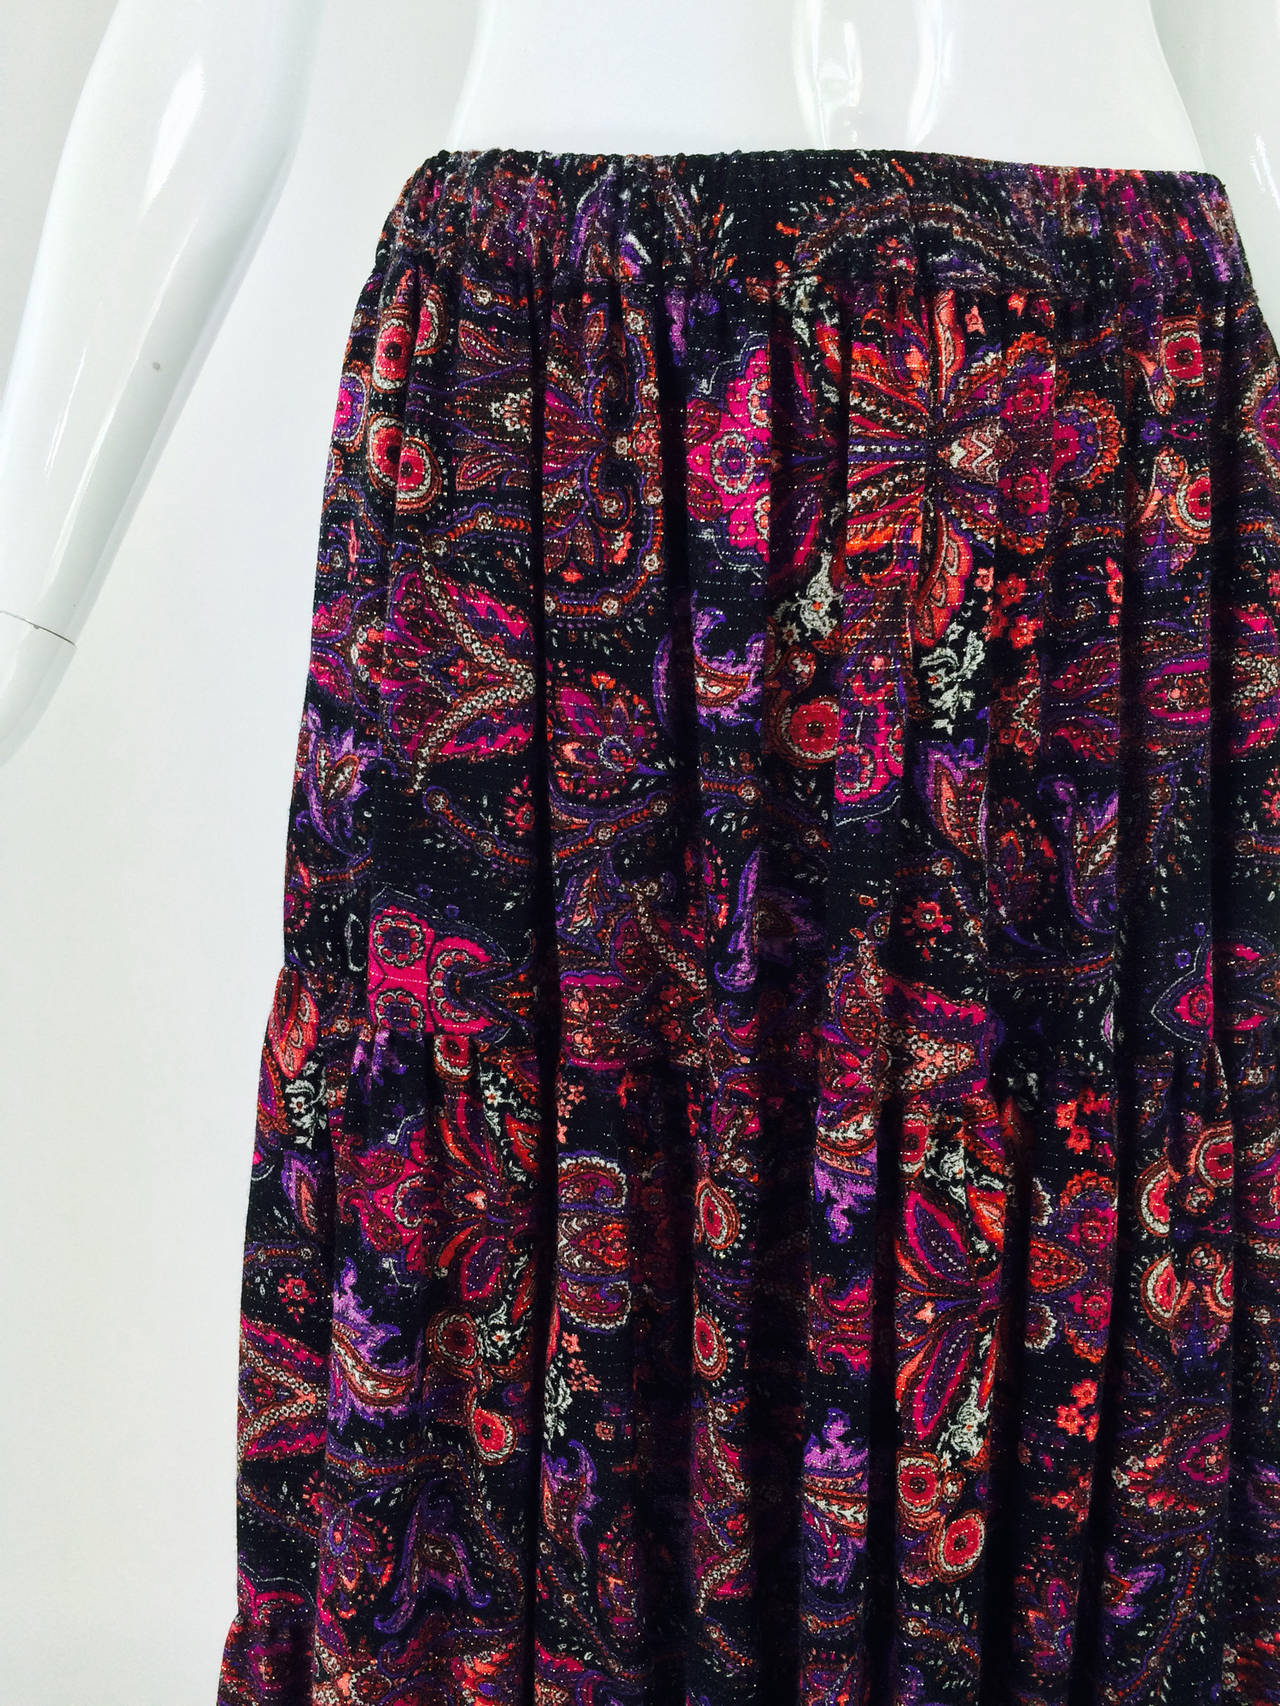 Yves St Laurent Rive Gauche metallic paisley tiered gypsy skirt 1970s...Triple tiered metallic paisley skirt in wine, hot pink, black & silver wool challis...wide cased elastic waist...Unlined...Marked size 38...

Please check the measurements